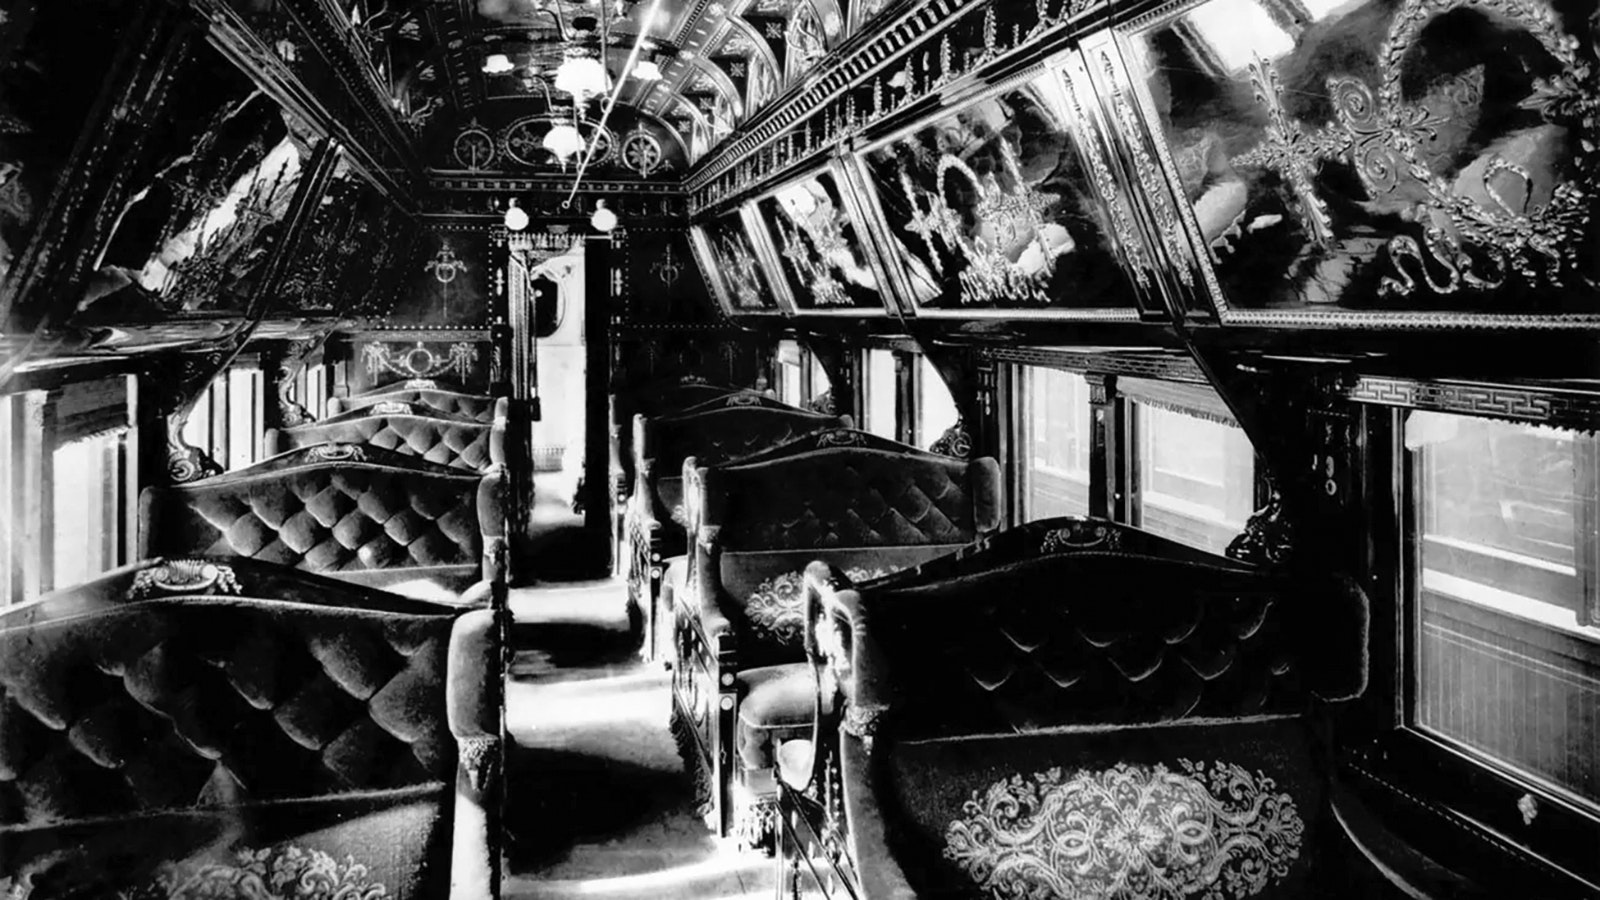 This period photo shows just how luxurious and opulent some Pullman railroad cars were as railroads opened up America.